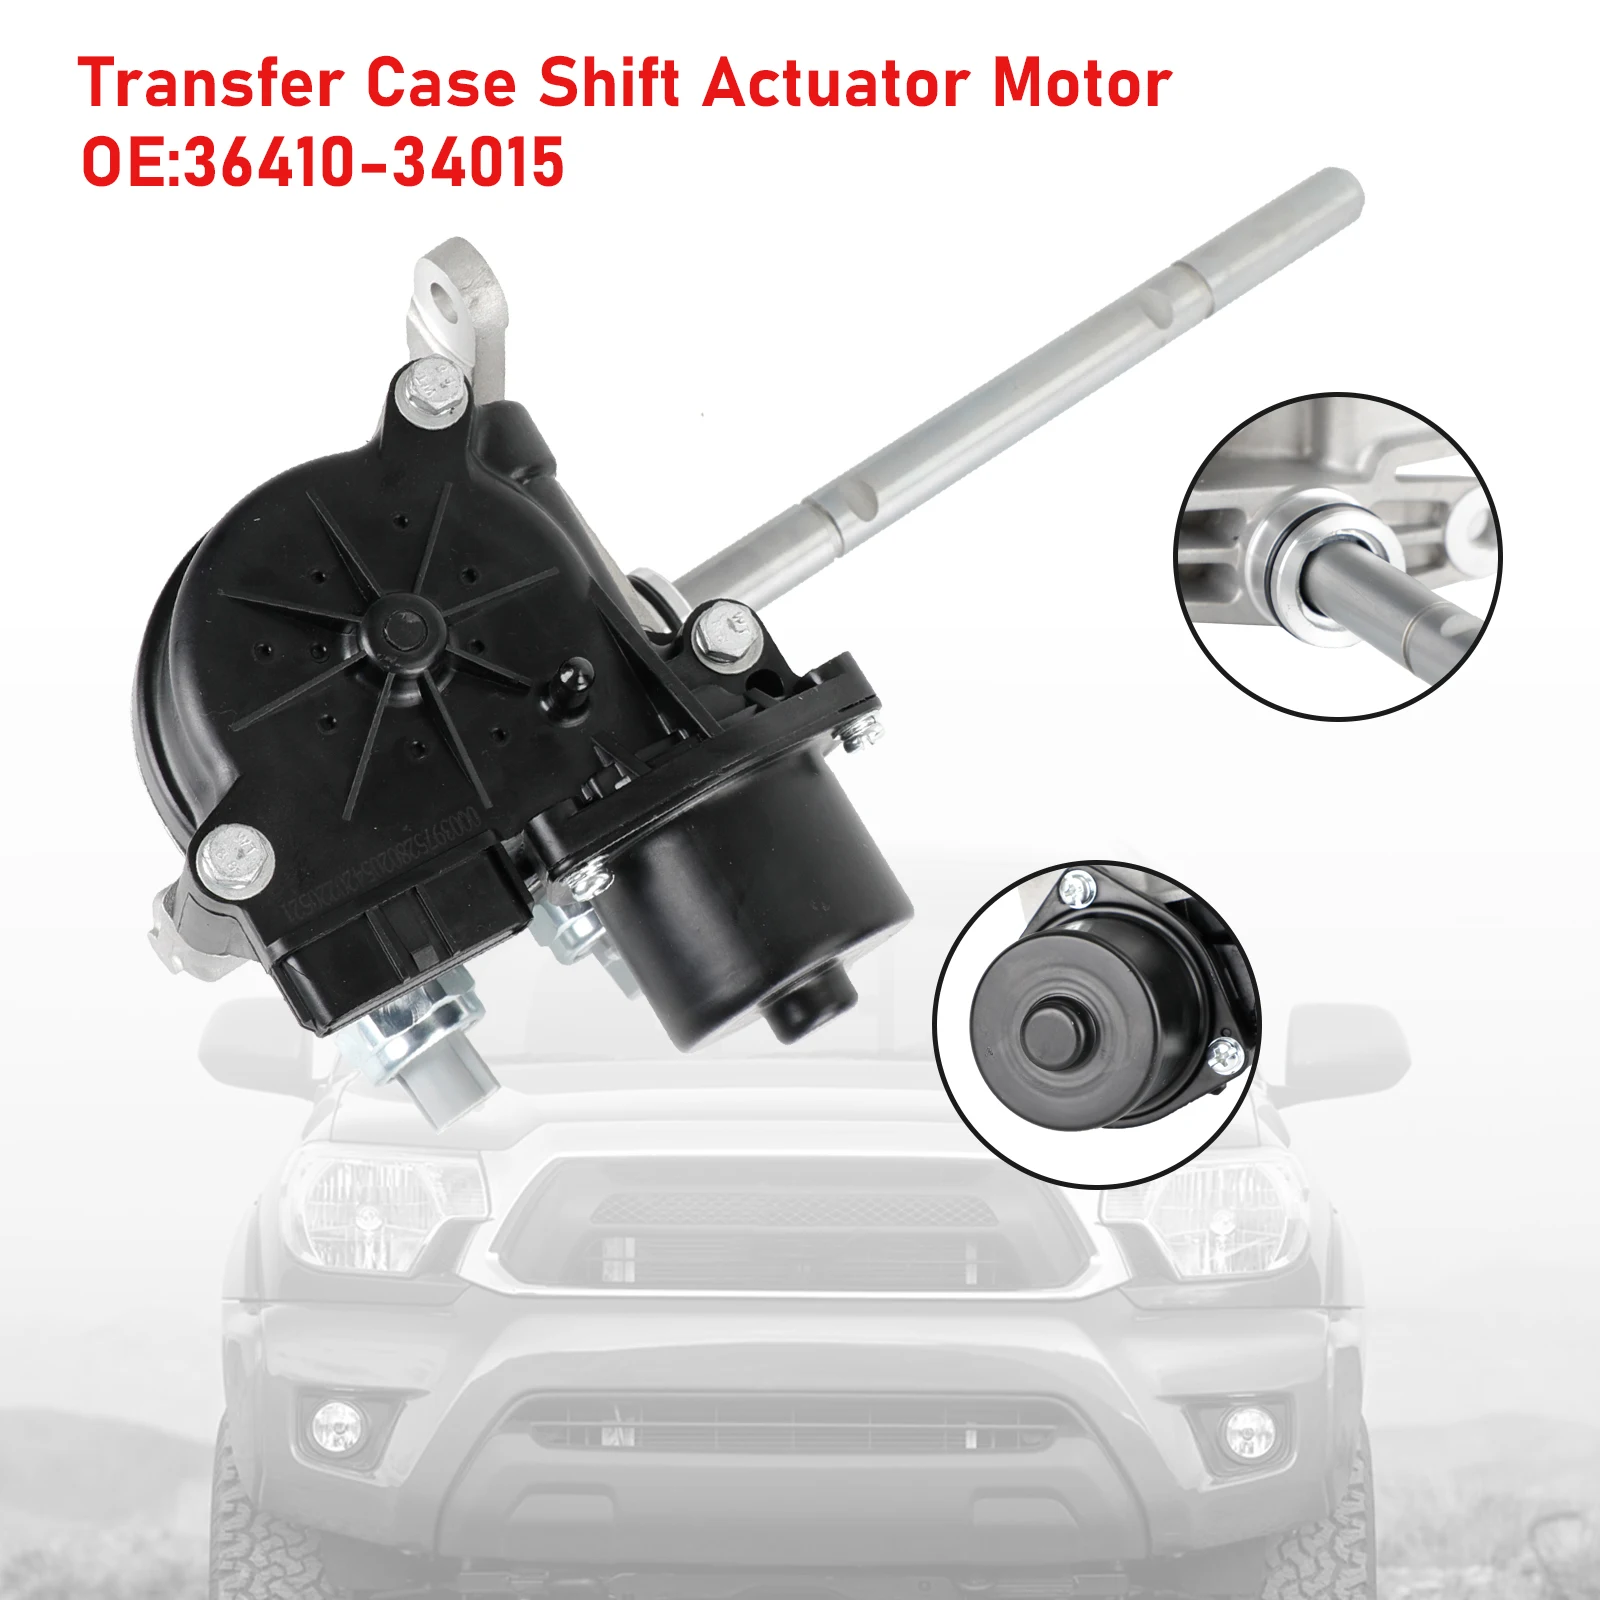 

Artudatech Transfer Case Shift Actuator Motor for Toyota Tundra 4Runner Tacoma 36410-34015 Car Accessories